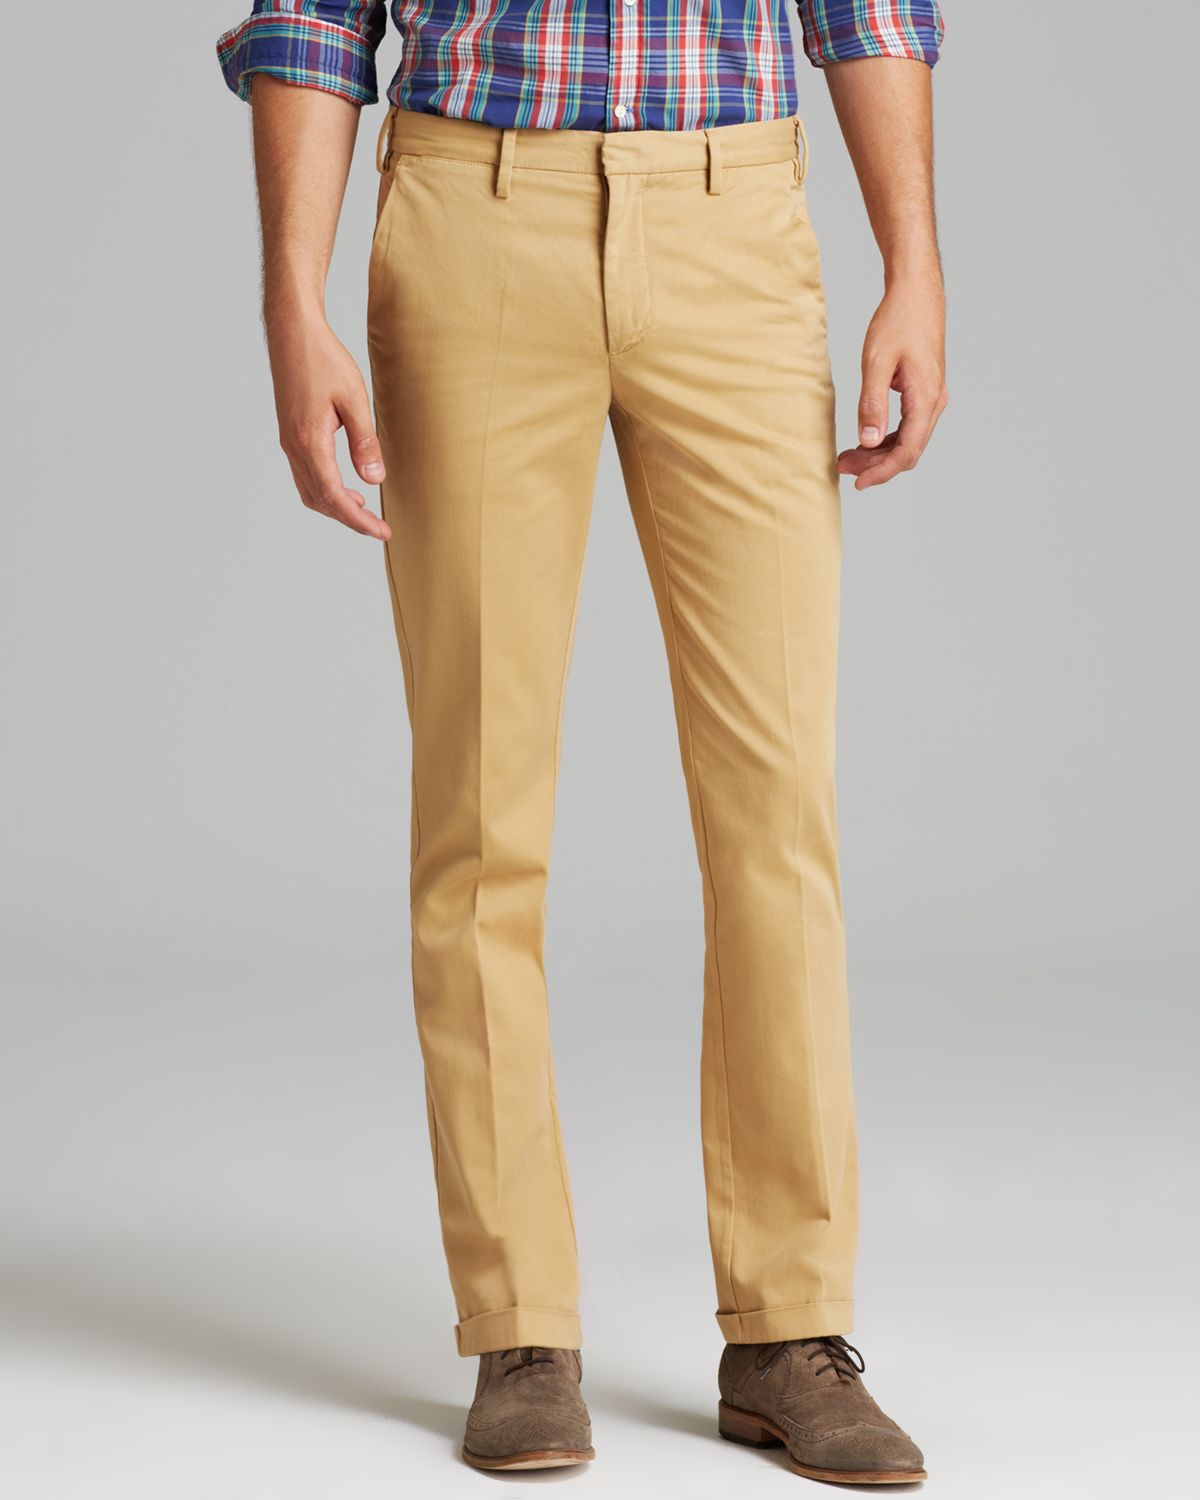 Lyst - Gant Rugger Winter Chino Pants in Natural for Men